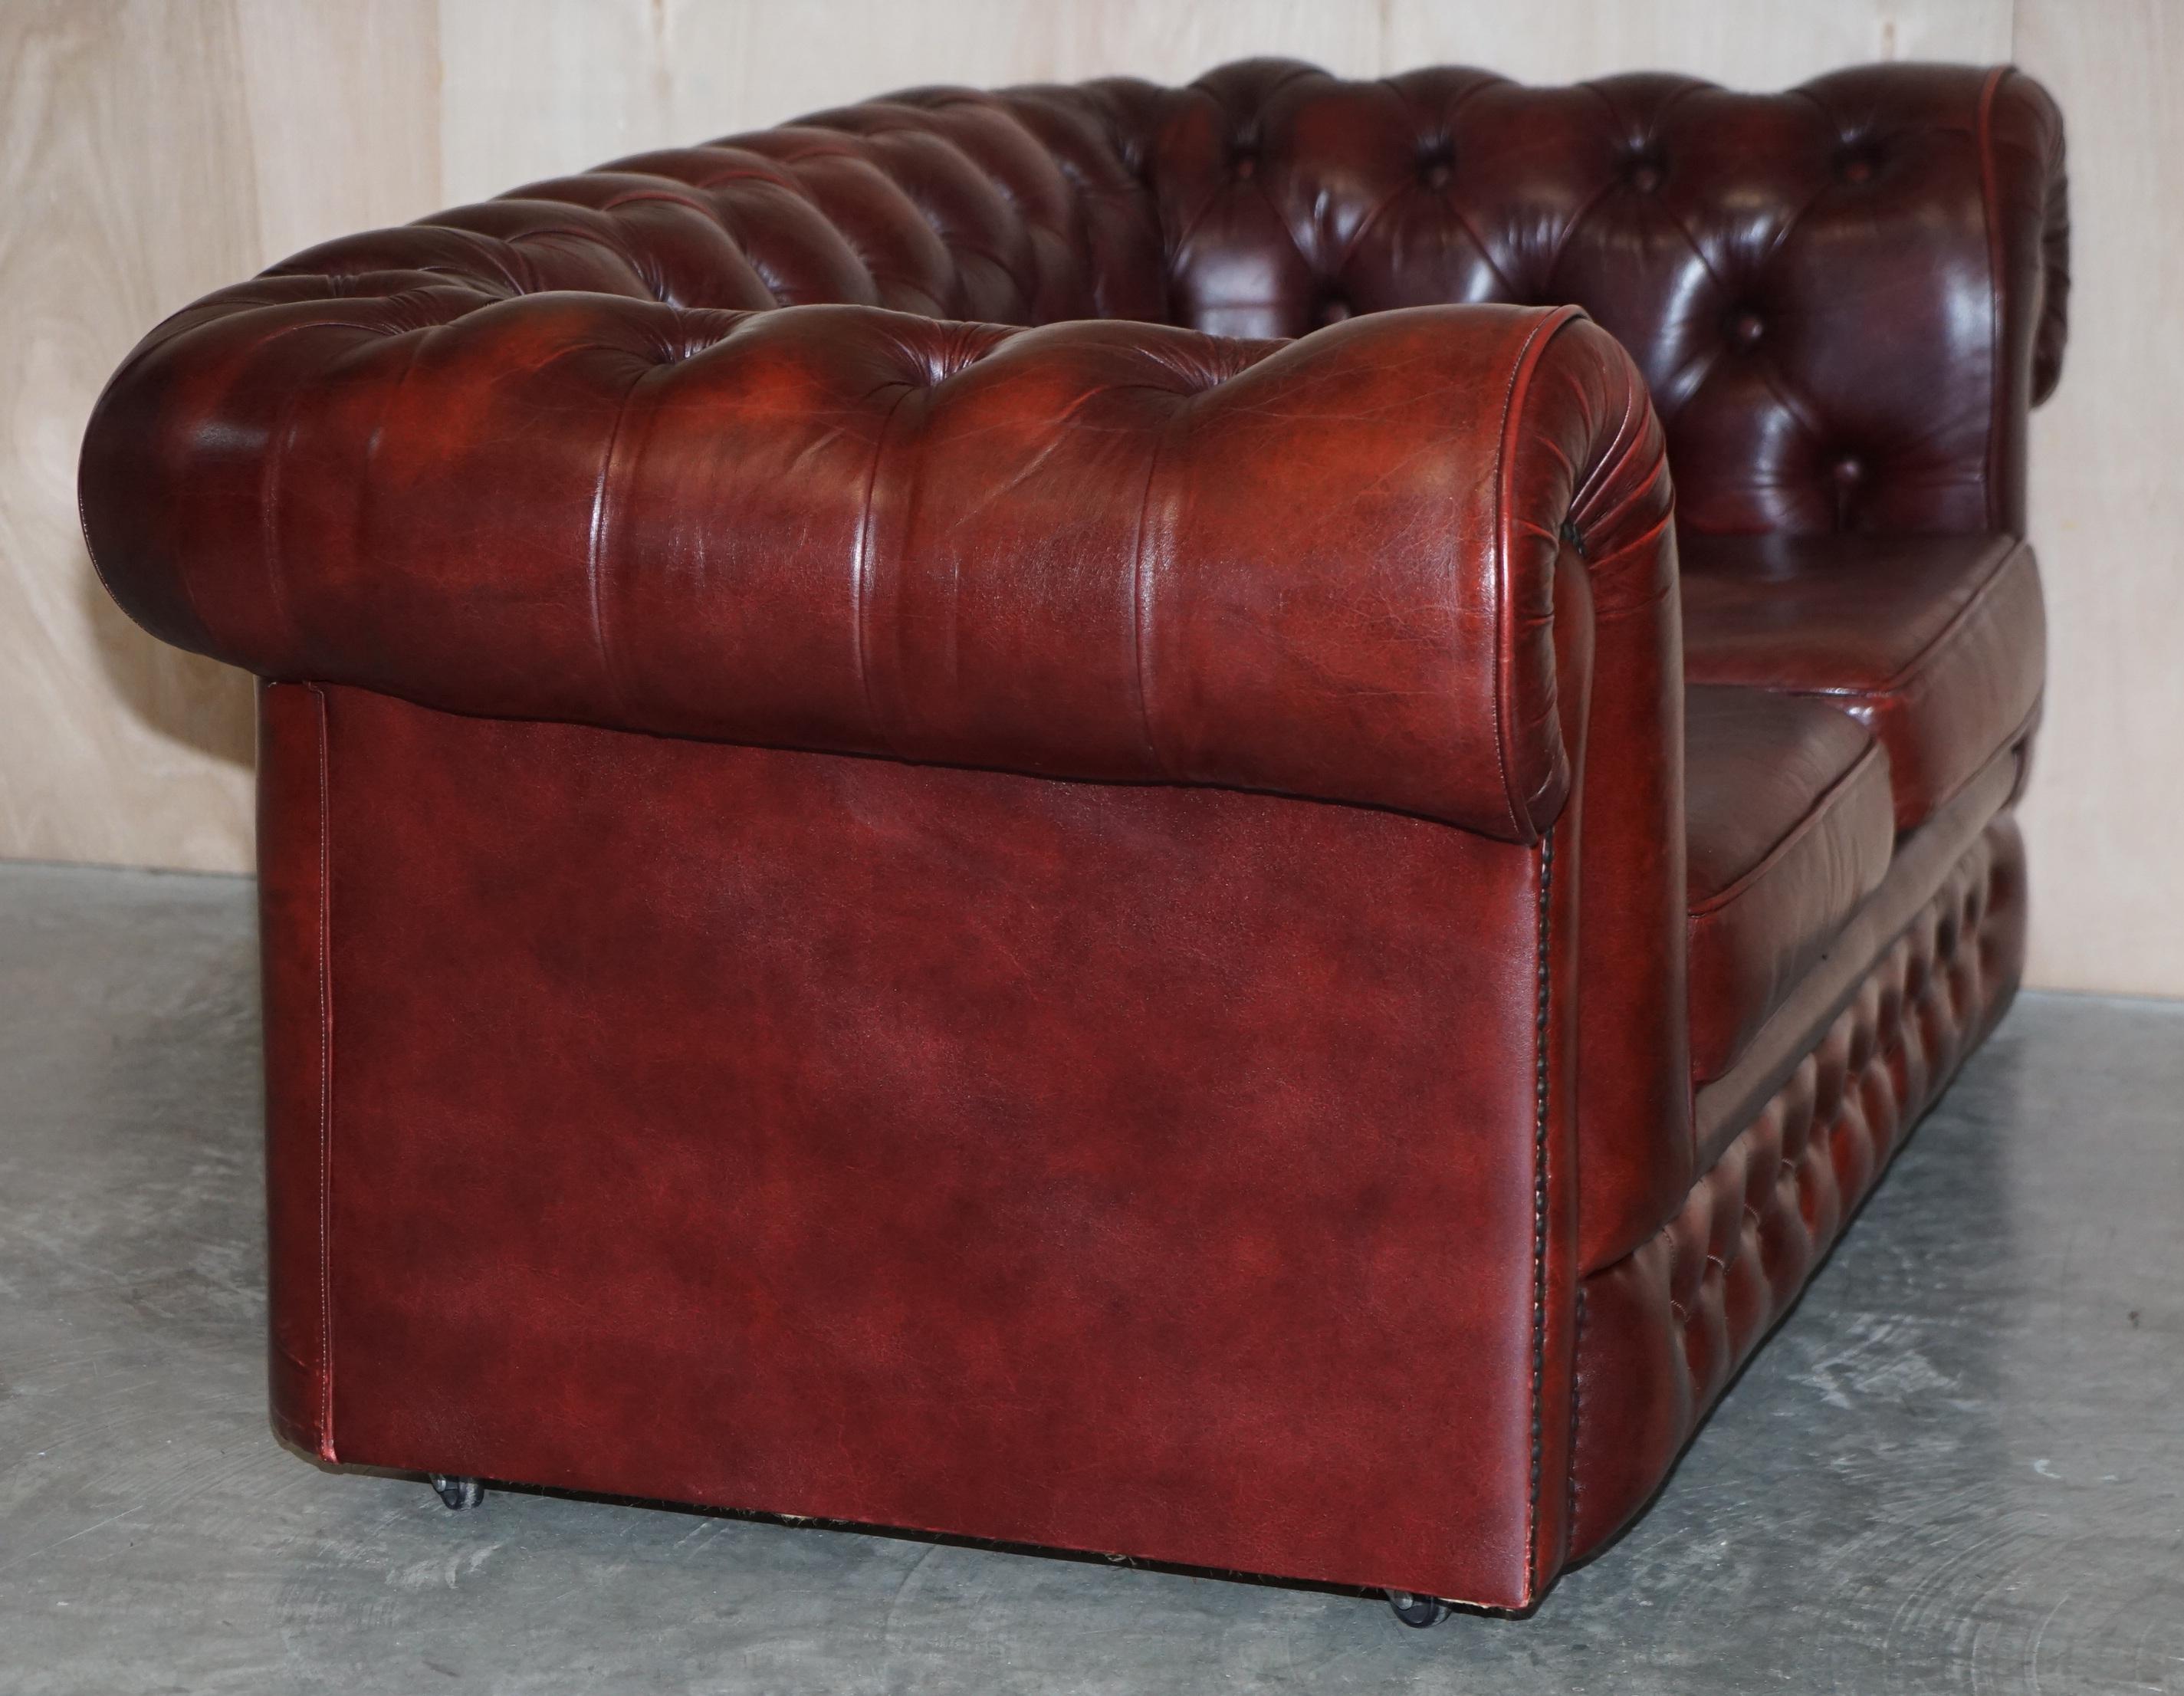 Lovely Vintage Oxblood Leather Chesterfield Gentleman's Club Sofa Part of Suite For Sale 4